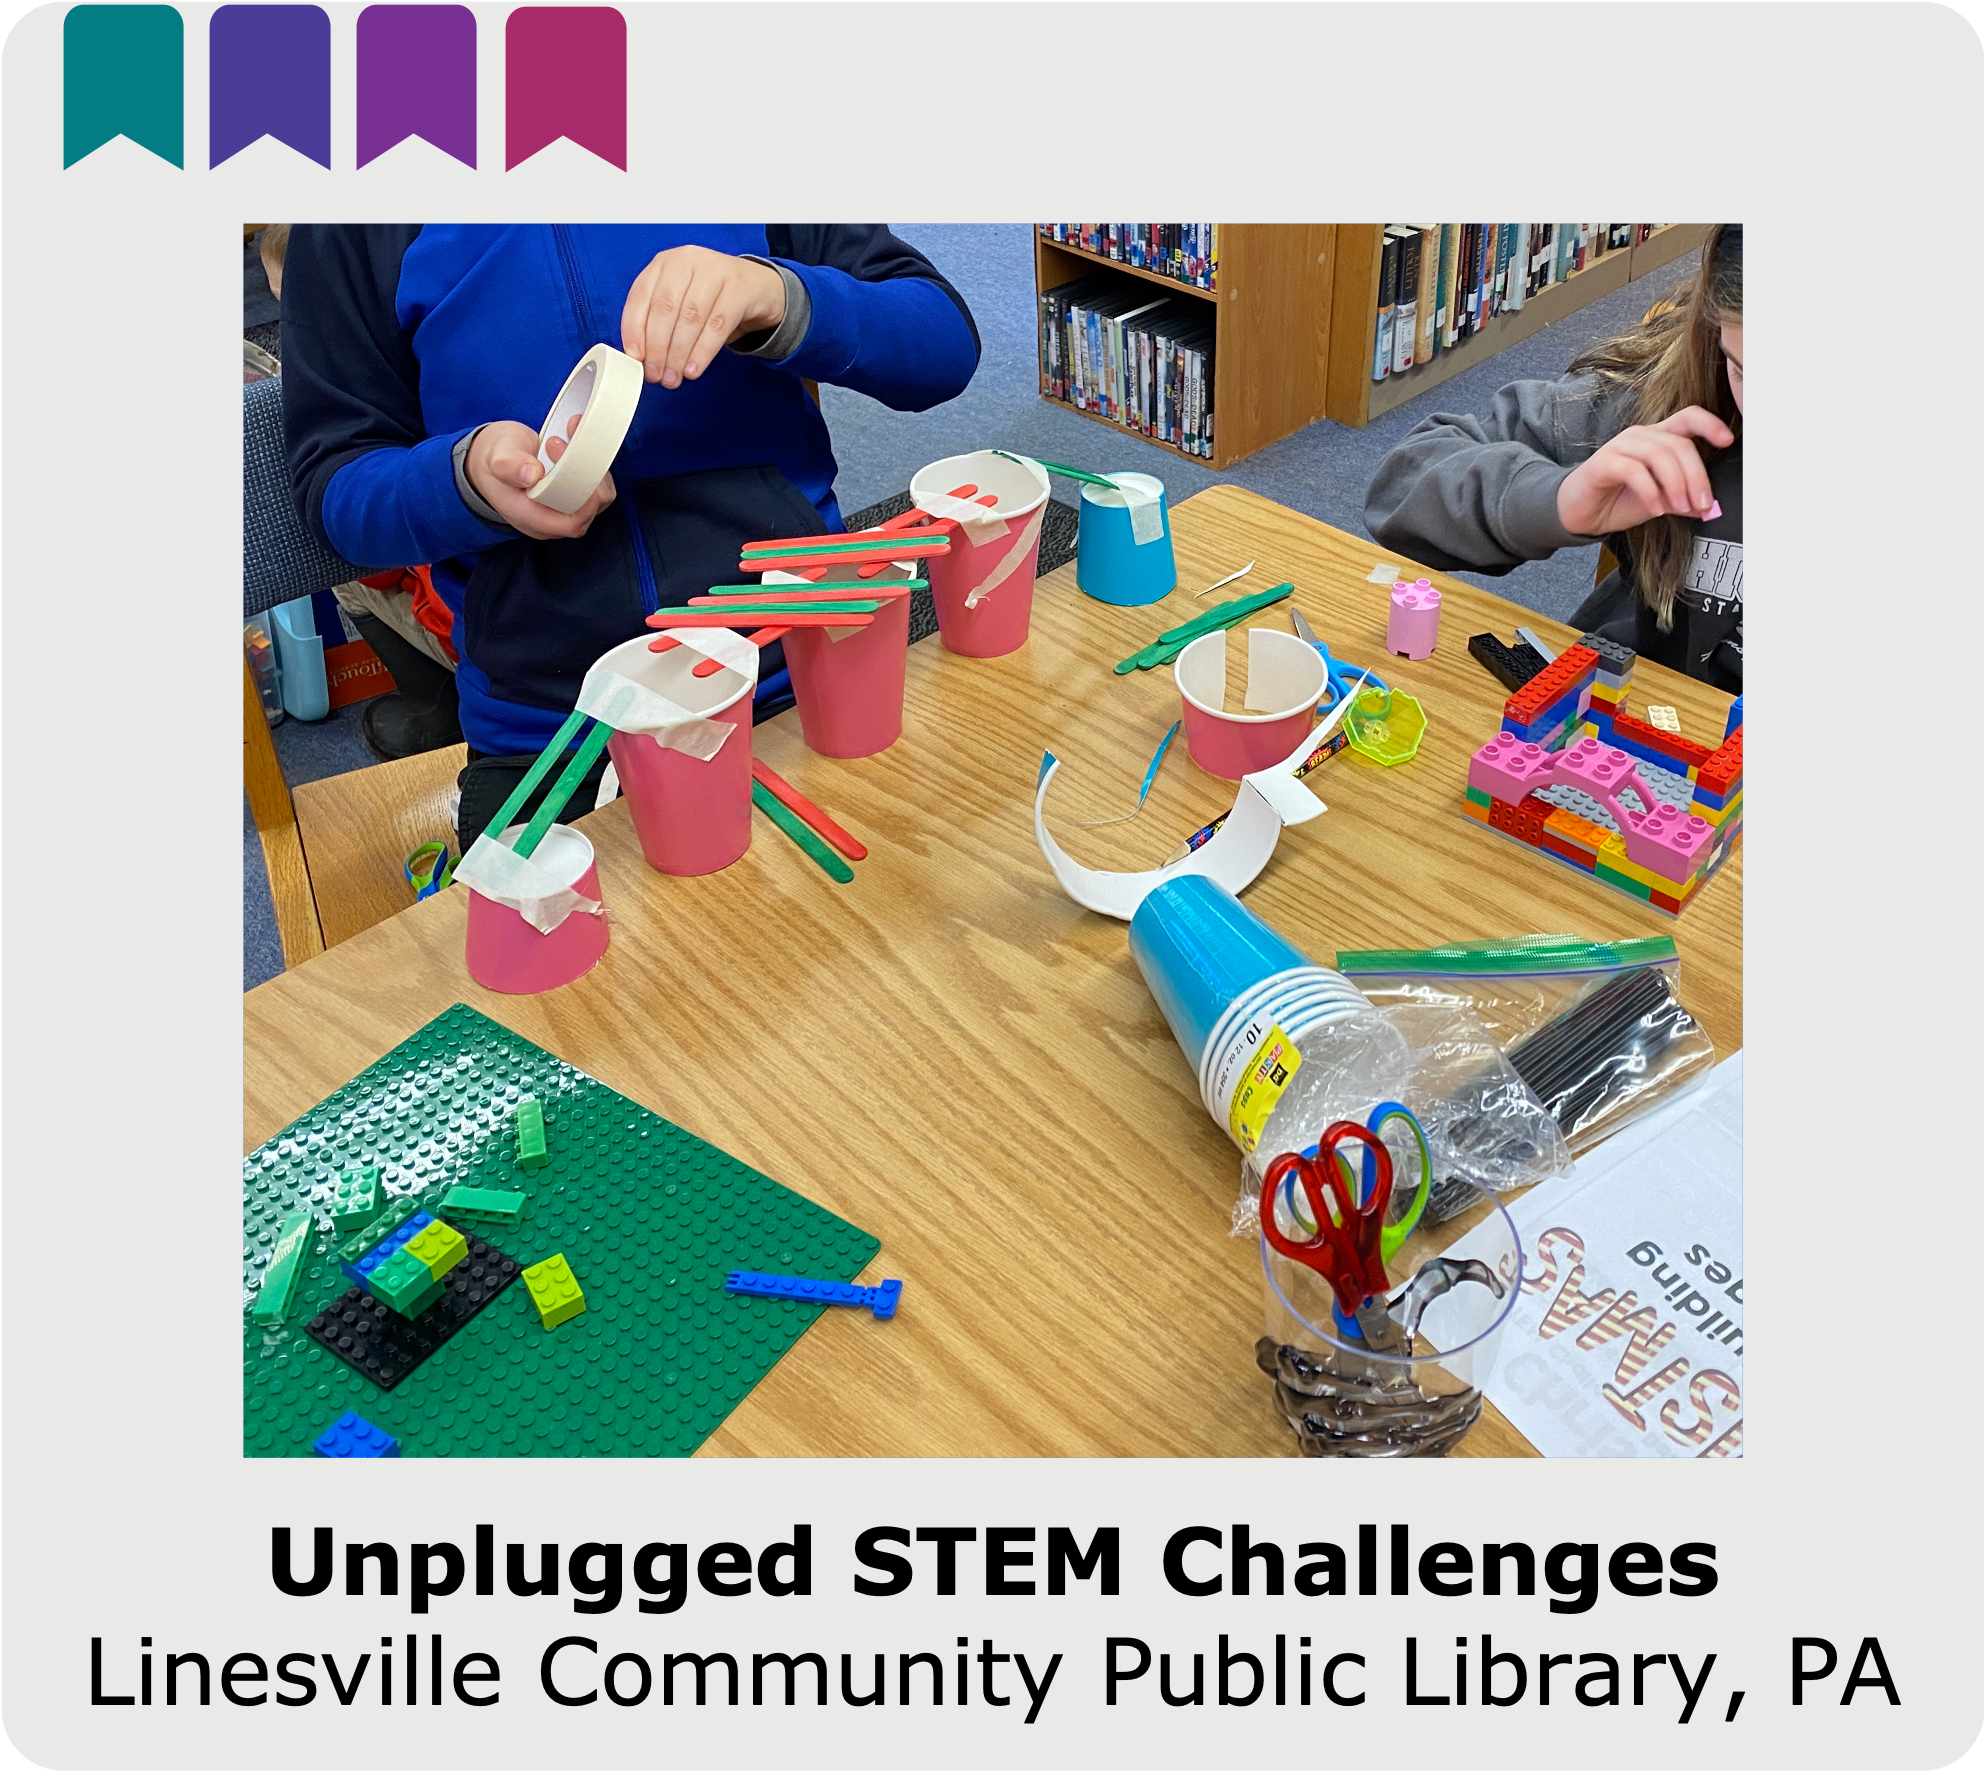 Click to open the case study of the unplugged STEM challenges program at Linesville Community Public Library in Pennsylvania.